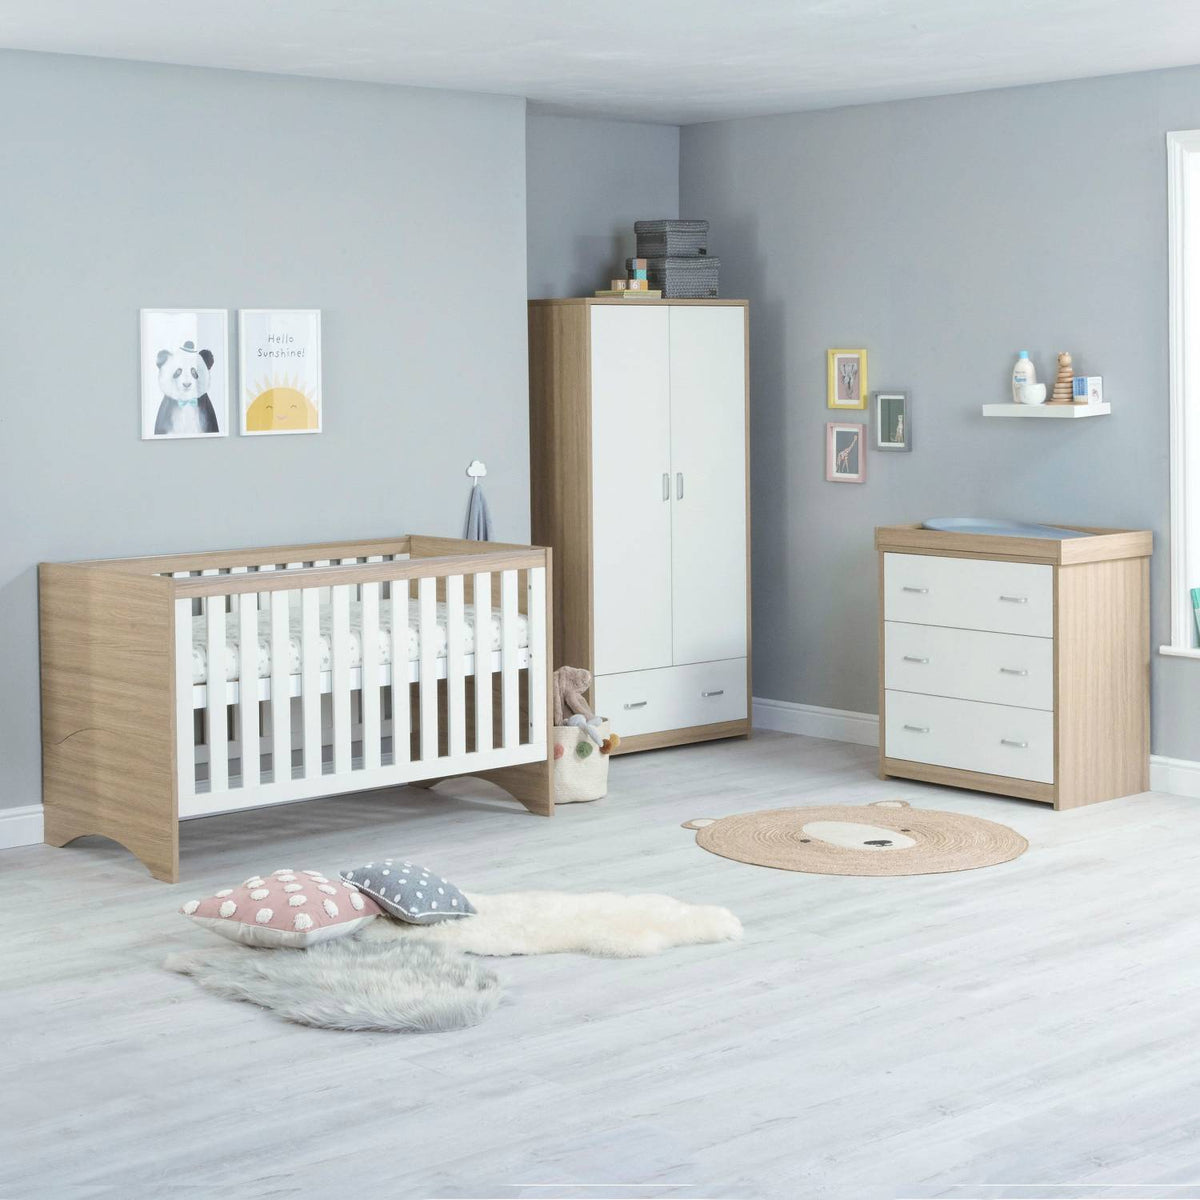 Babymore Veni 3 Piece Nursery Room Set with Drawer in Oak White colour